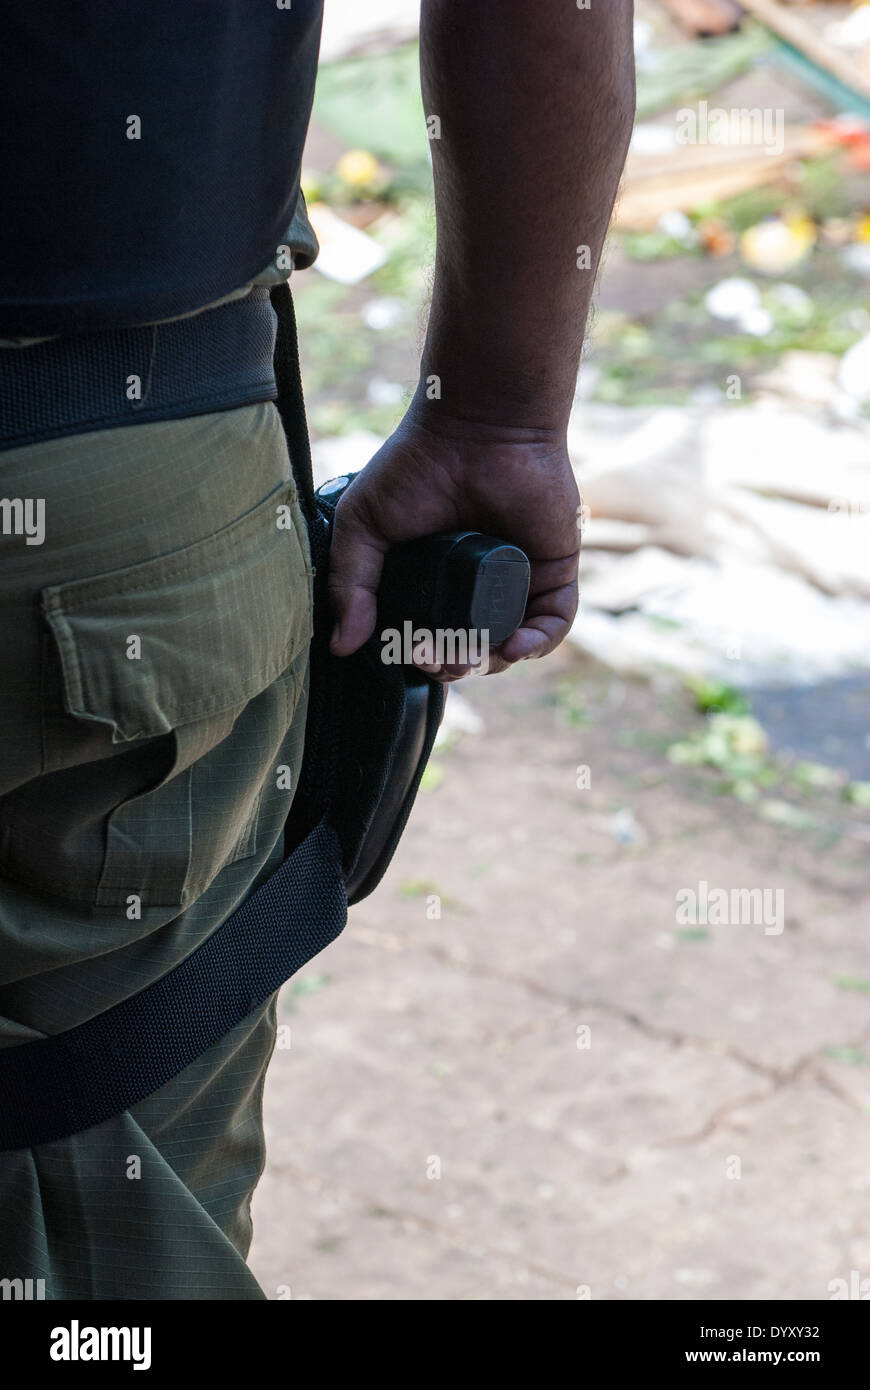 Belem, Para State, Brazil. Armed Police hand gun during a demonstration against the construction of the Belo Monte hydroelectric dam, 20th August 2011. Stock Photo